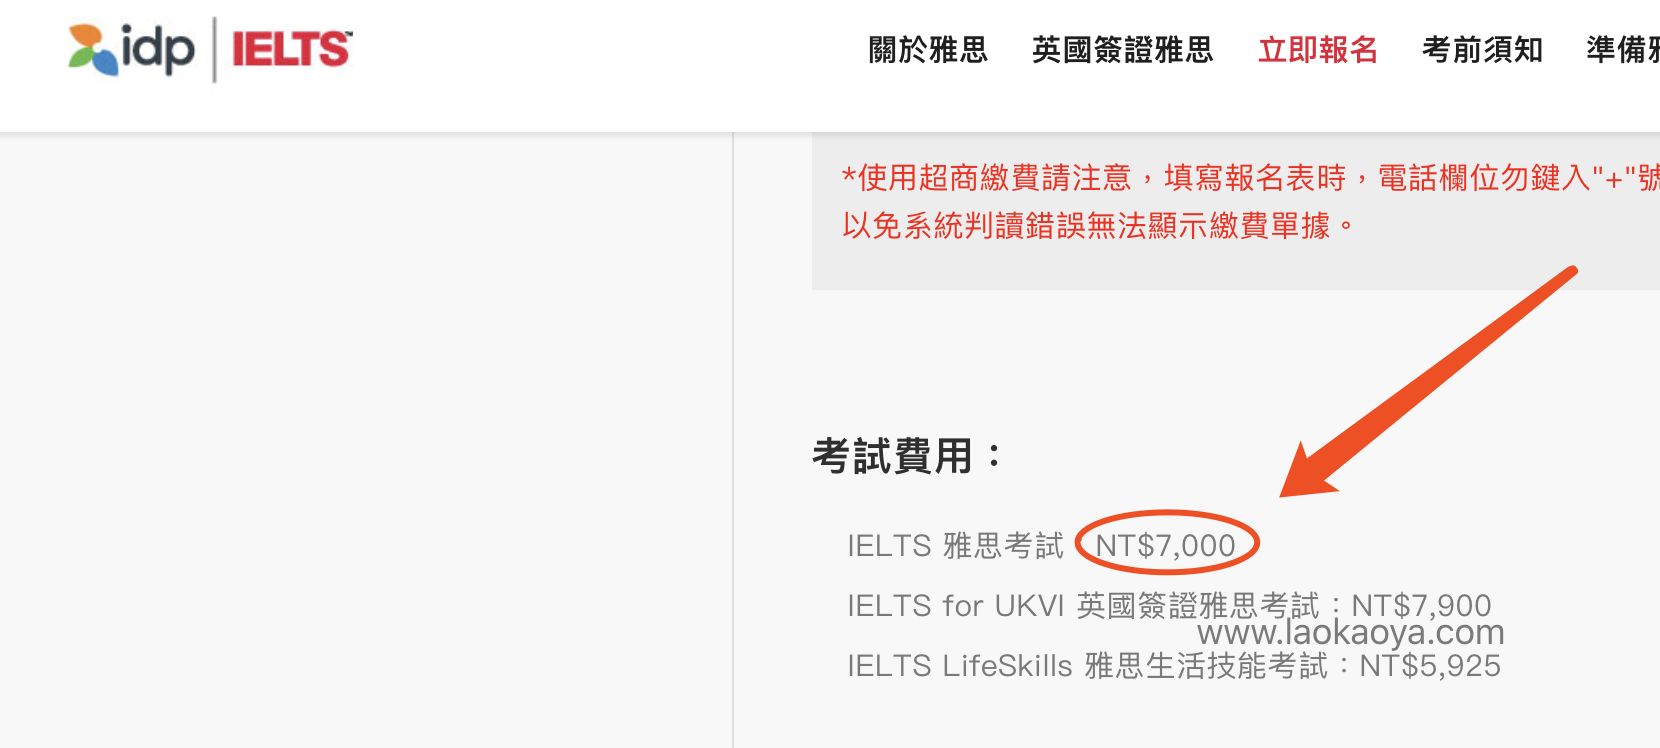  Is the price of IELTS BC the same as that of IDP